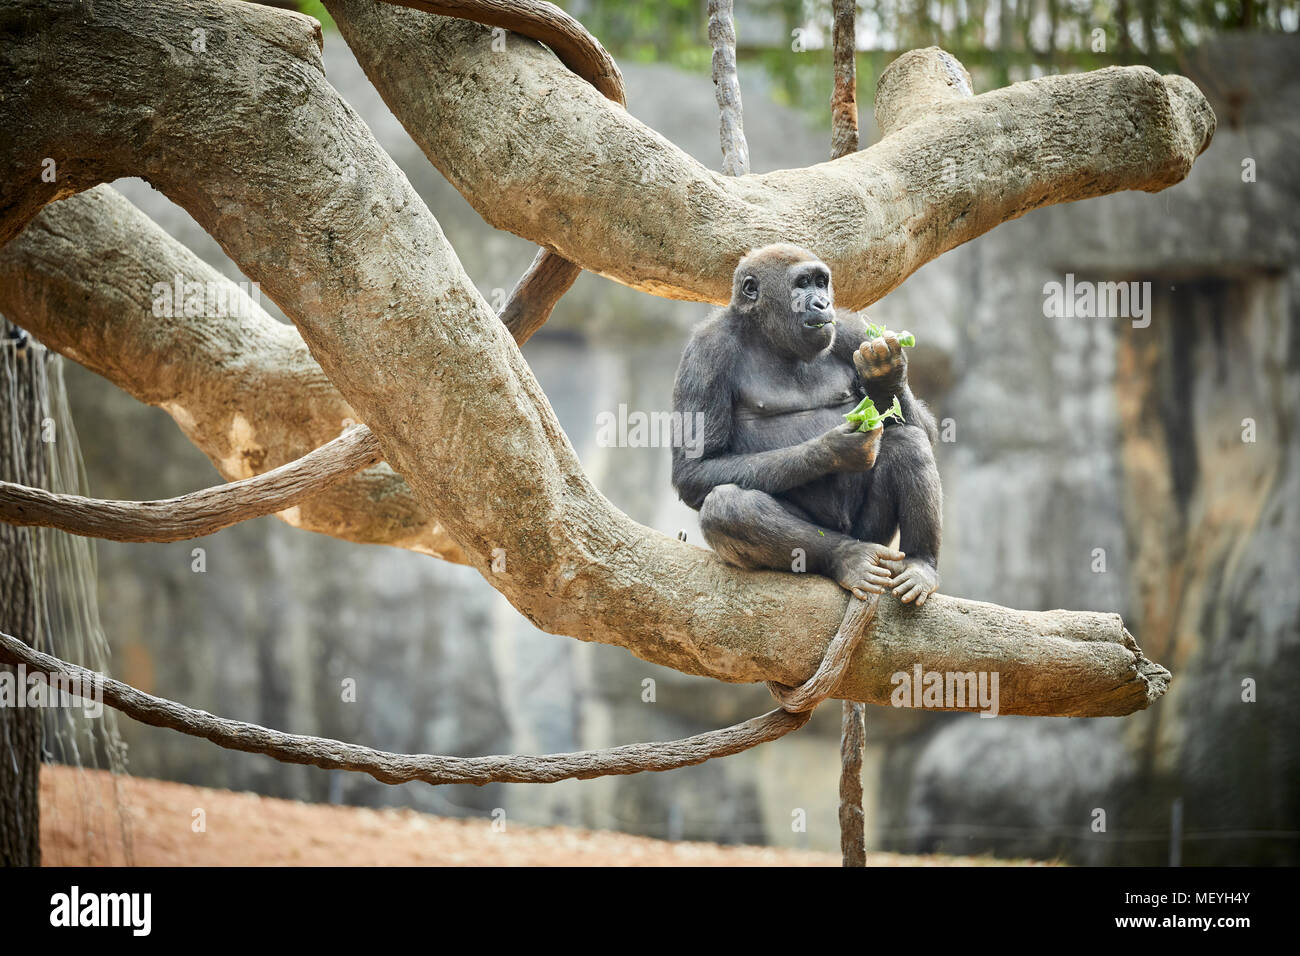 Atlanta capital of the U.S. state of Georgia,  Atlanta Zoo zoological park western lowland gorilla from lowland swamps in central Africa Stock Photo